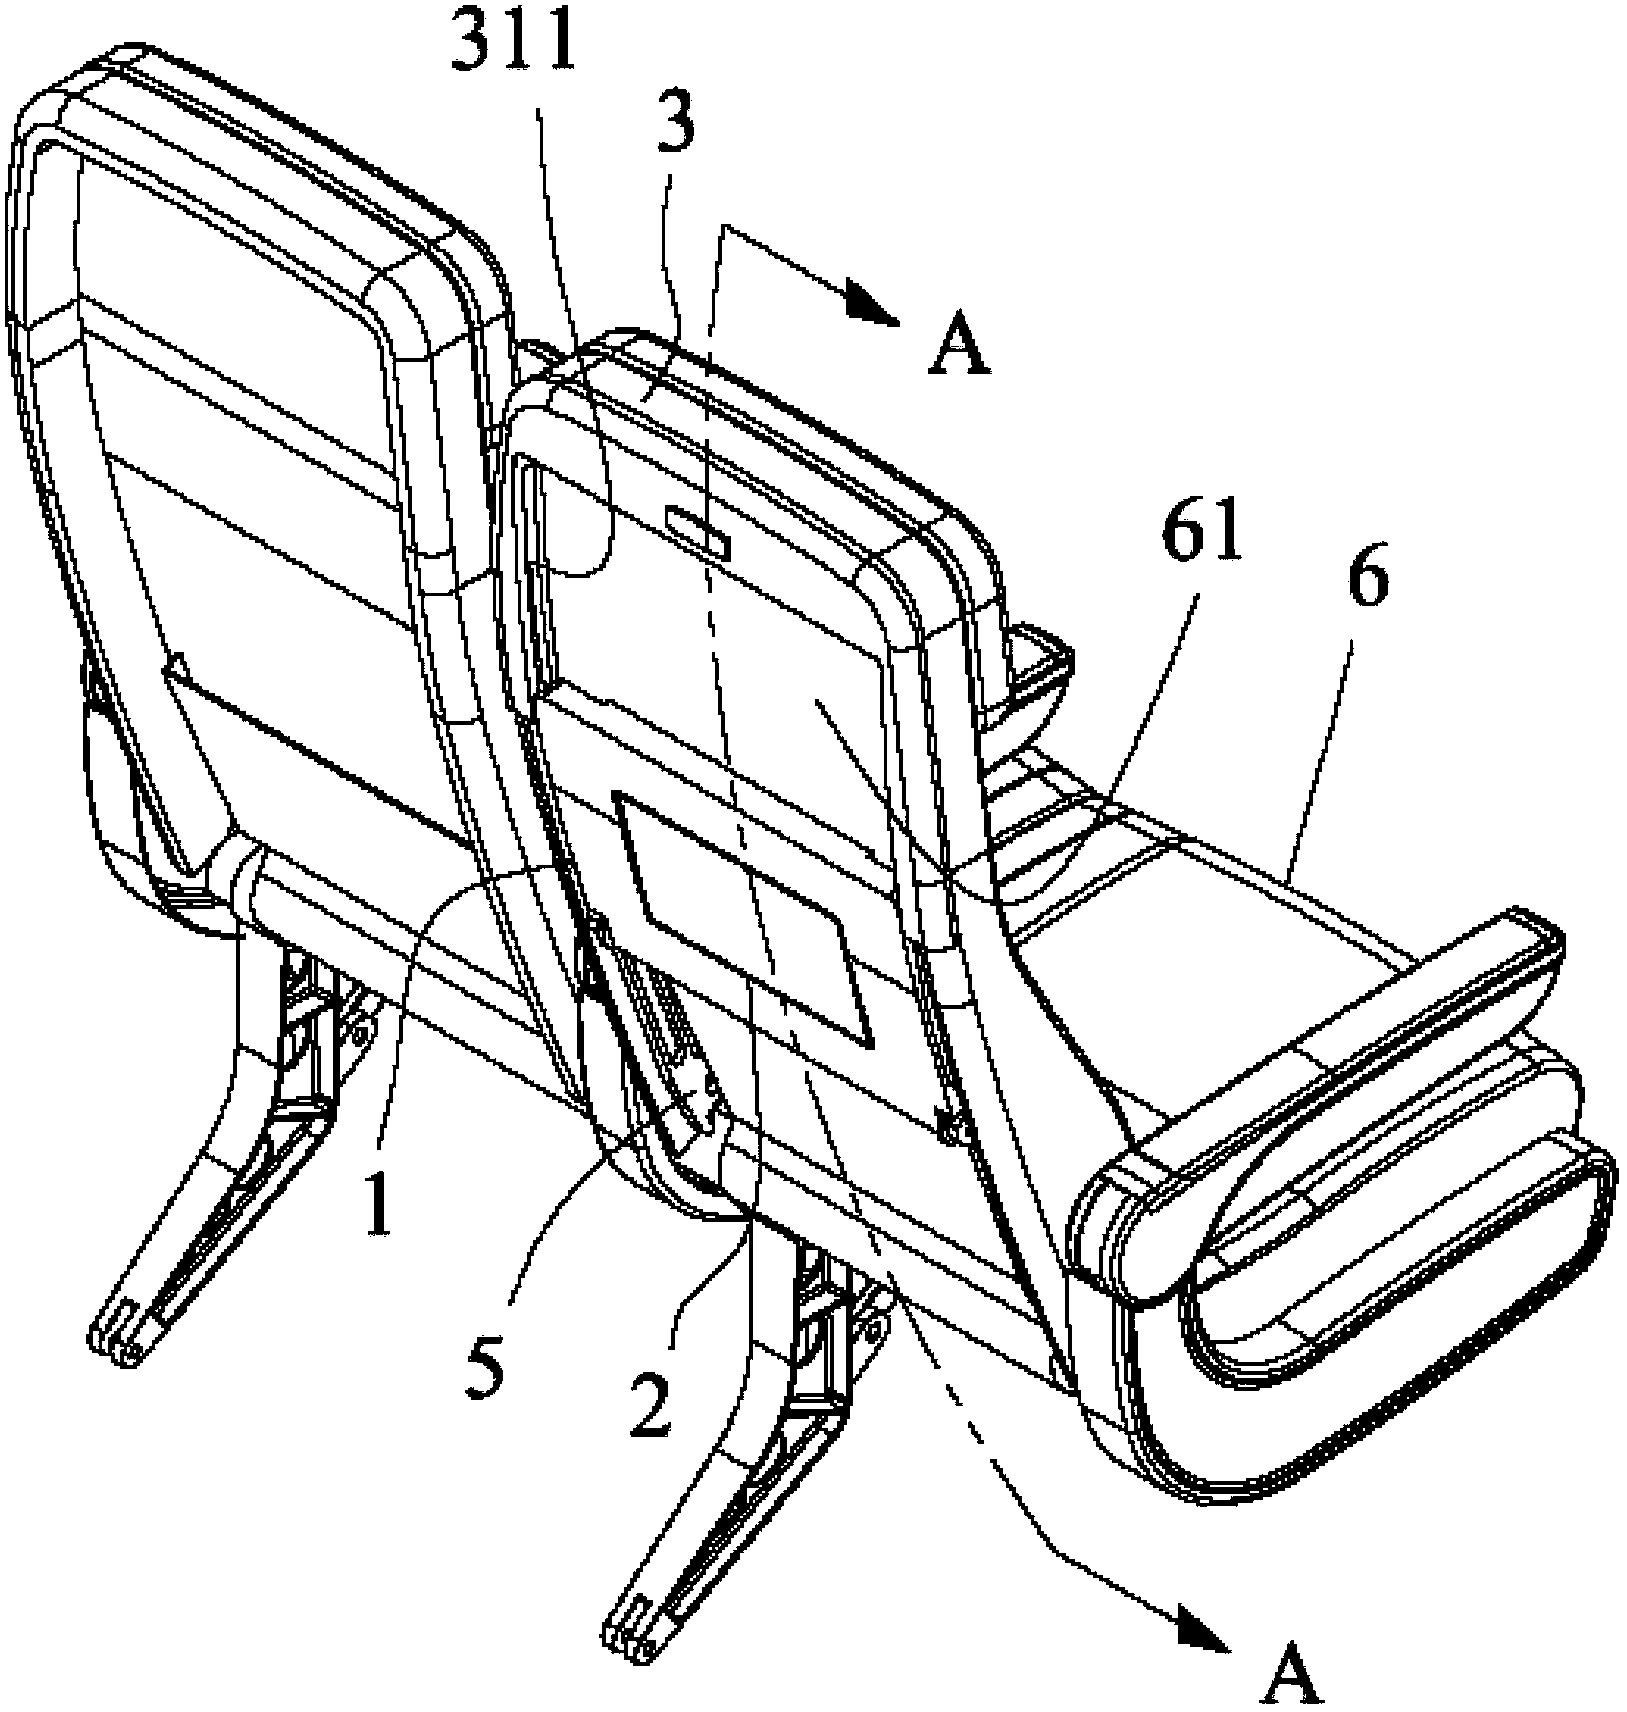 Dining table device with chair back